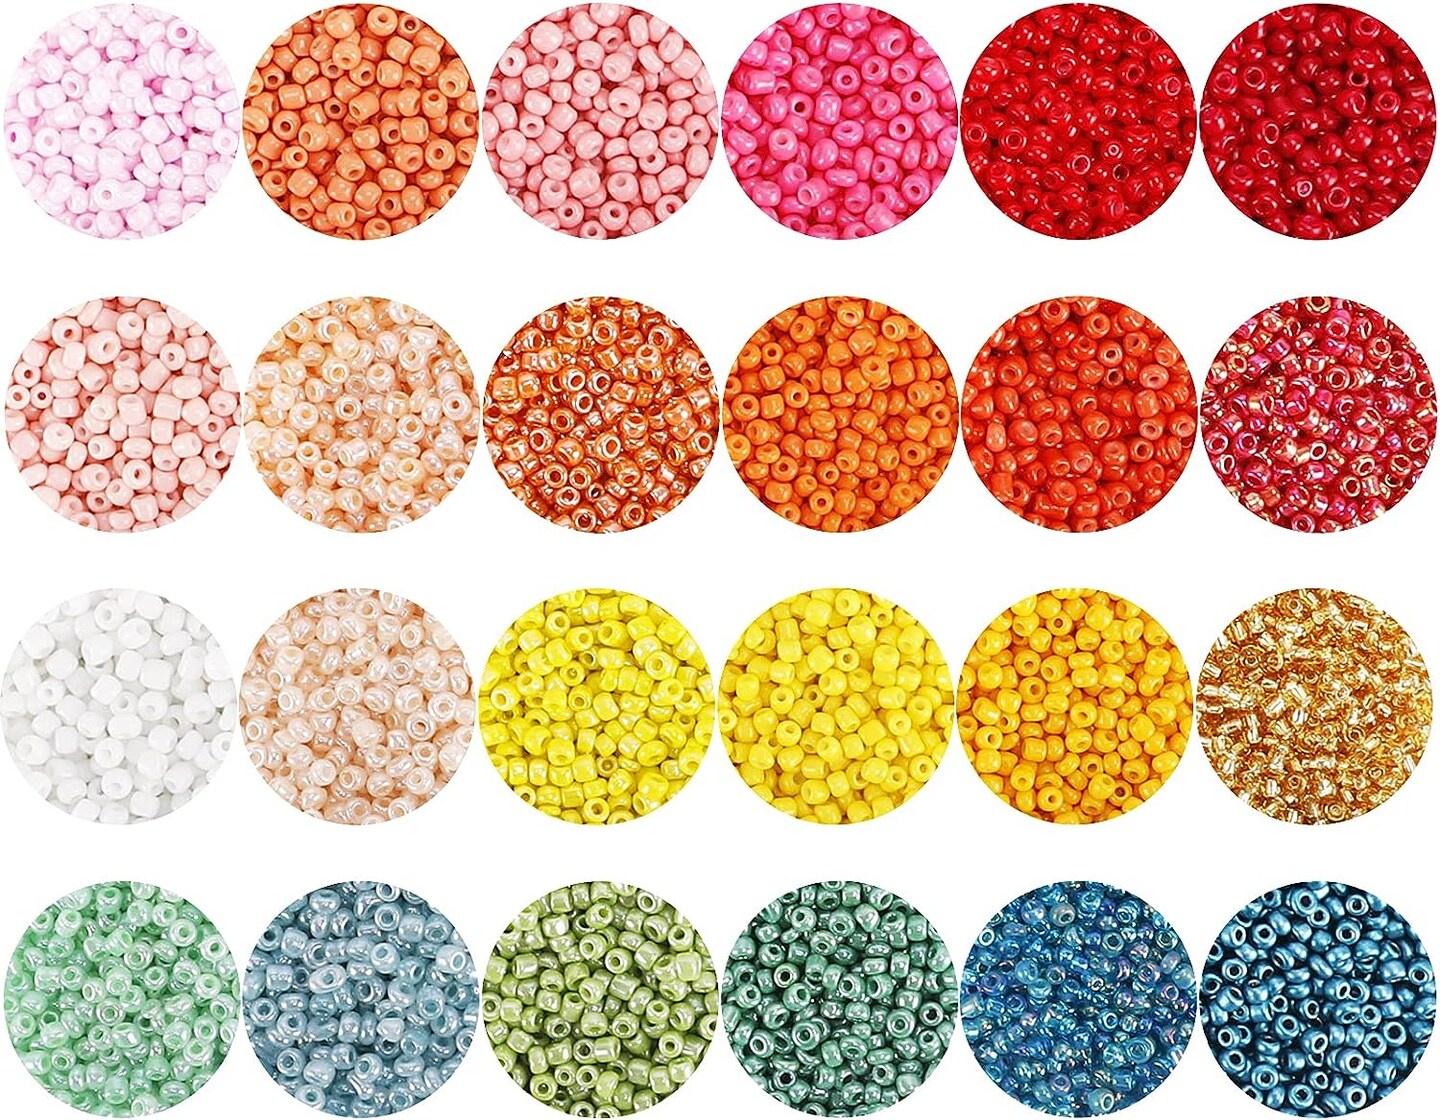 44000pcs 2mm Glass Seed Beads for Bracelet Making Kit, 48 Colors Small Beads, Craft Beads Kit for Jewelry Making, with 2 Storage Boxes, Charms, Jump Rings and Clear Elastic String Cord